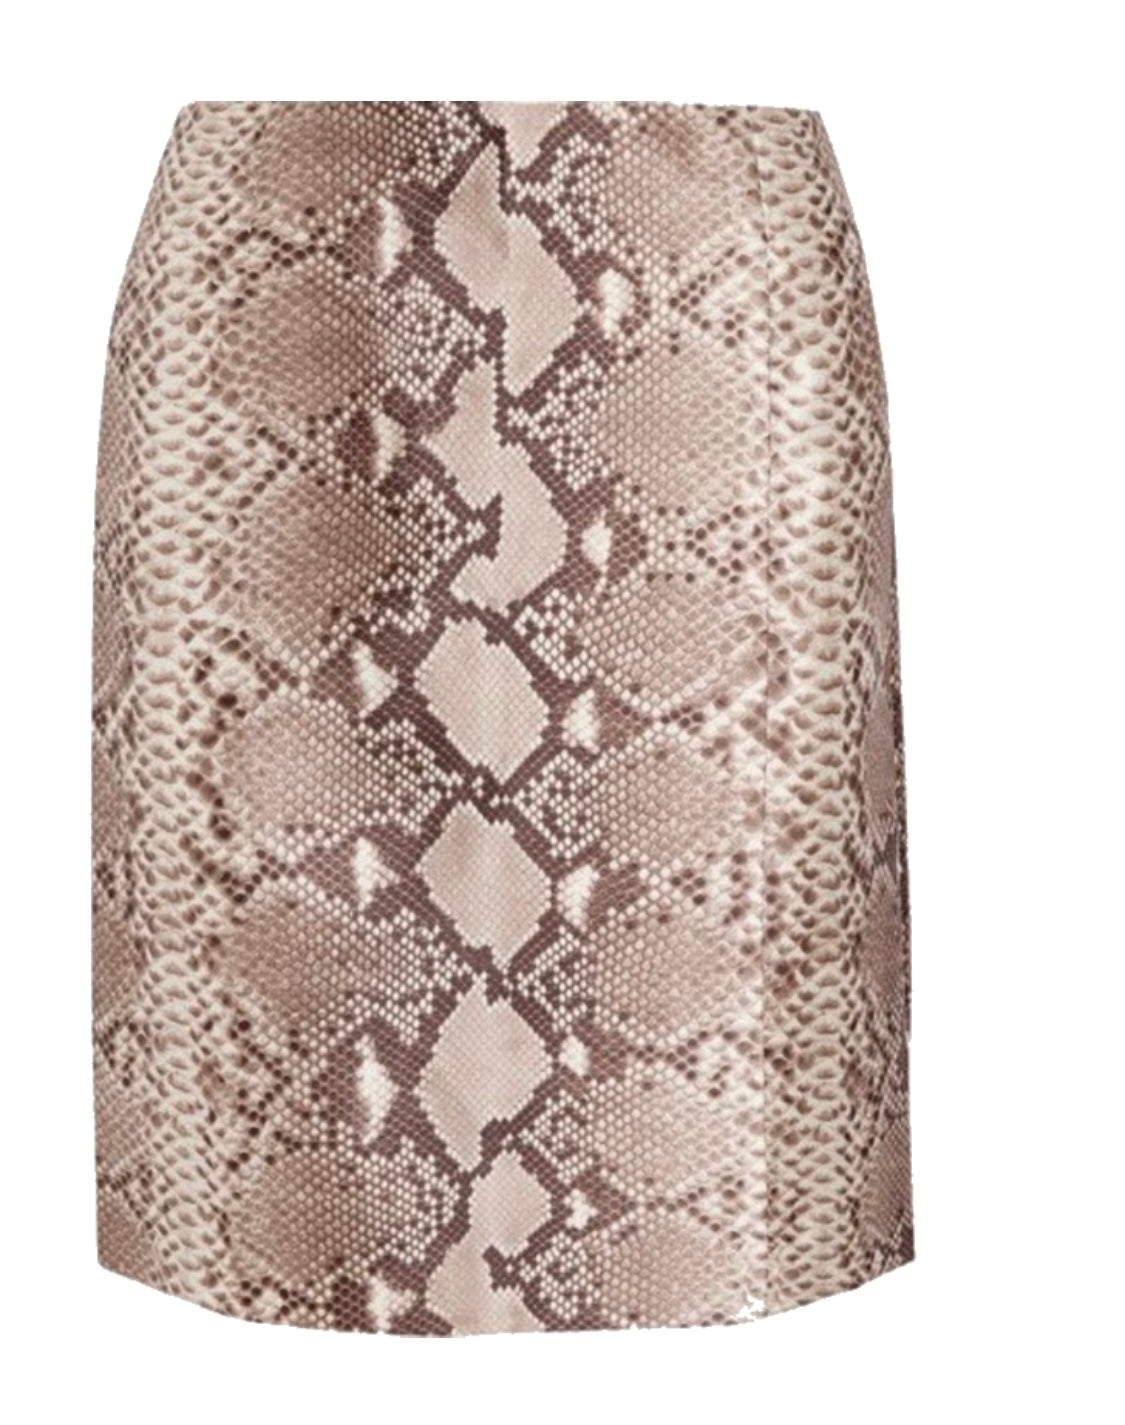 Buy Authentic, Preloved Tory Burch Snakeskin Print Skirt from Second Edit  by Style Theory